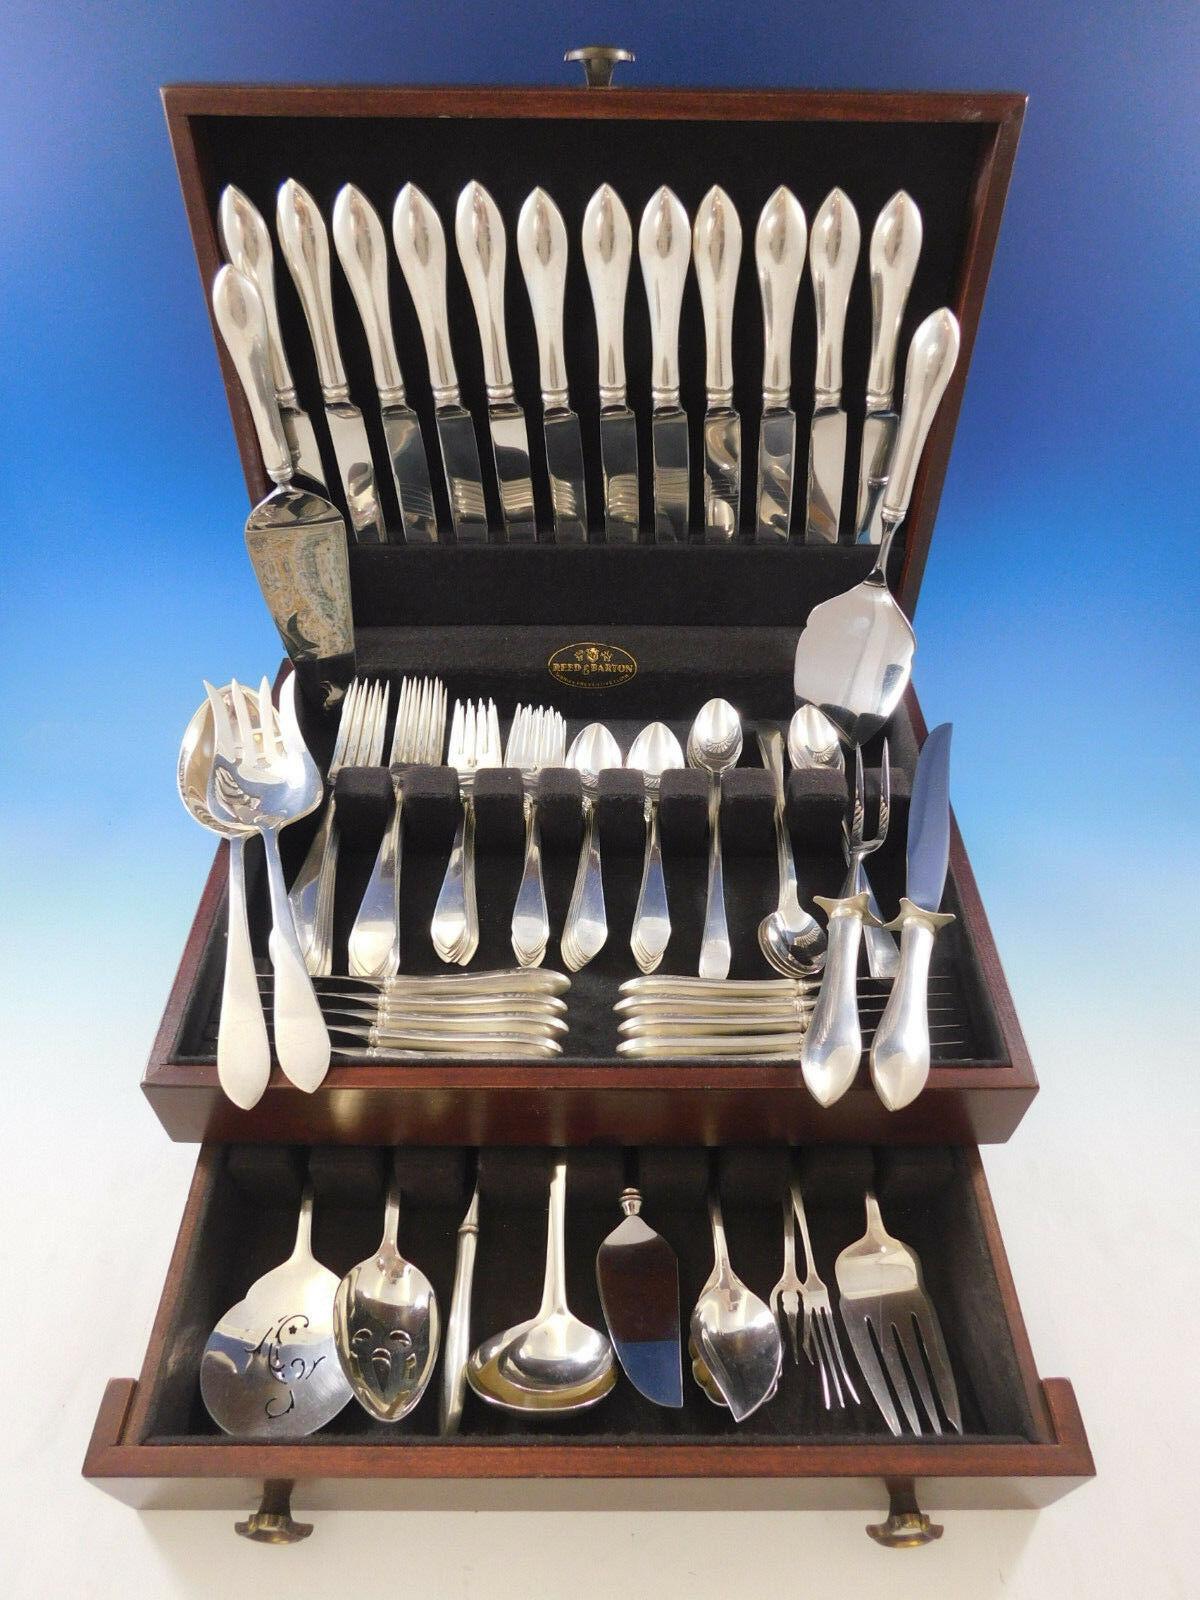 Incredible dinner size pointed antique by Reed & Barton / Dominick & Haff sterling silver flatware set, 90 pieces, with tons of servers! This set includes:

12 dinner size knives, 9 1/2